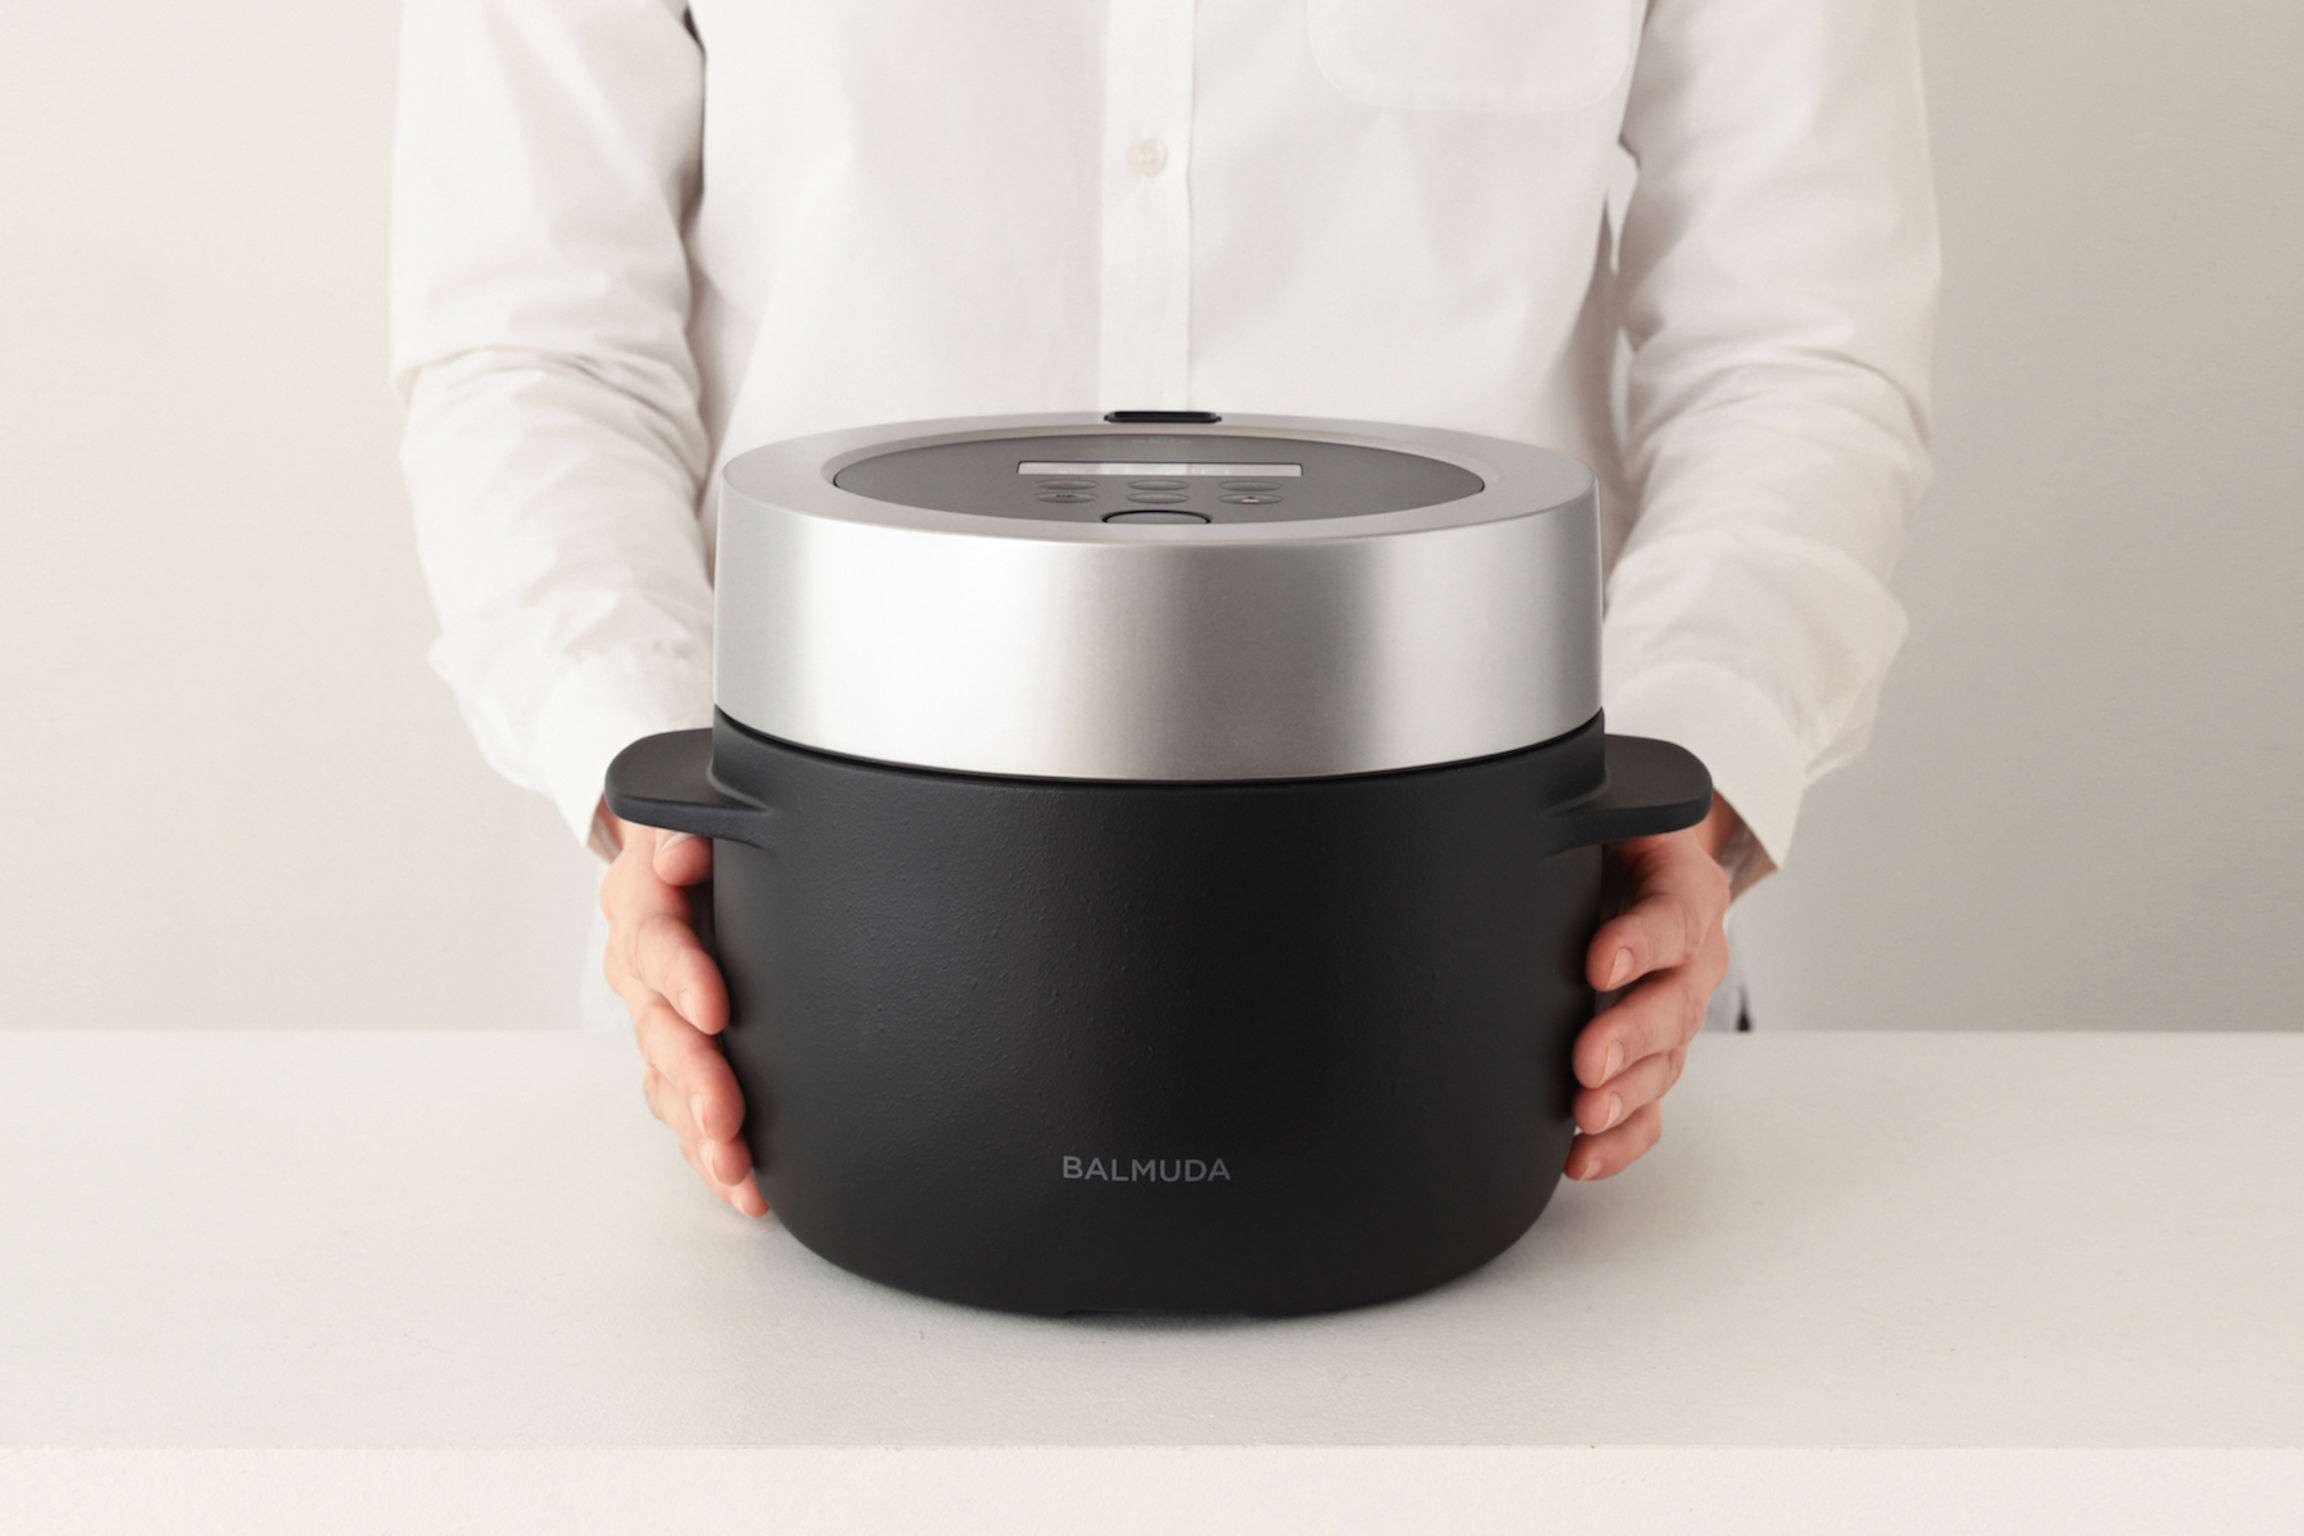 BIC CAMERA_English - -- Delicious Rice for the Best Meal -- “BALMUDA The  Gohan”!! BALMUDA which has been popular for their toaster is releasing a  steam rice cooker! Their rice cooker packs